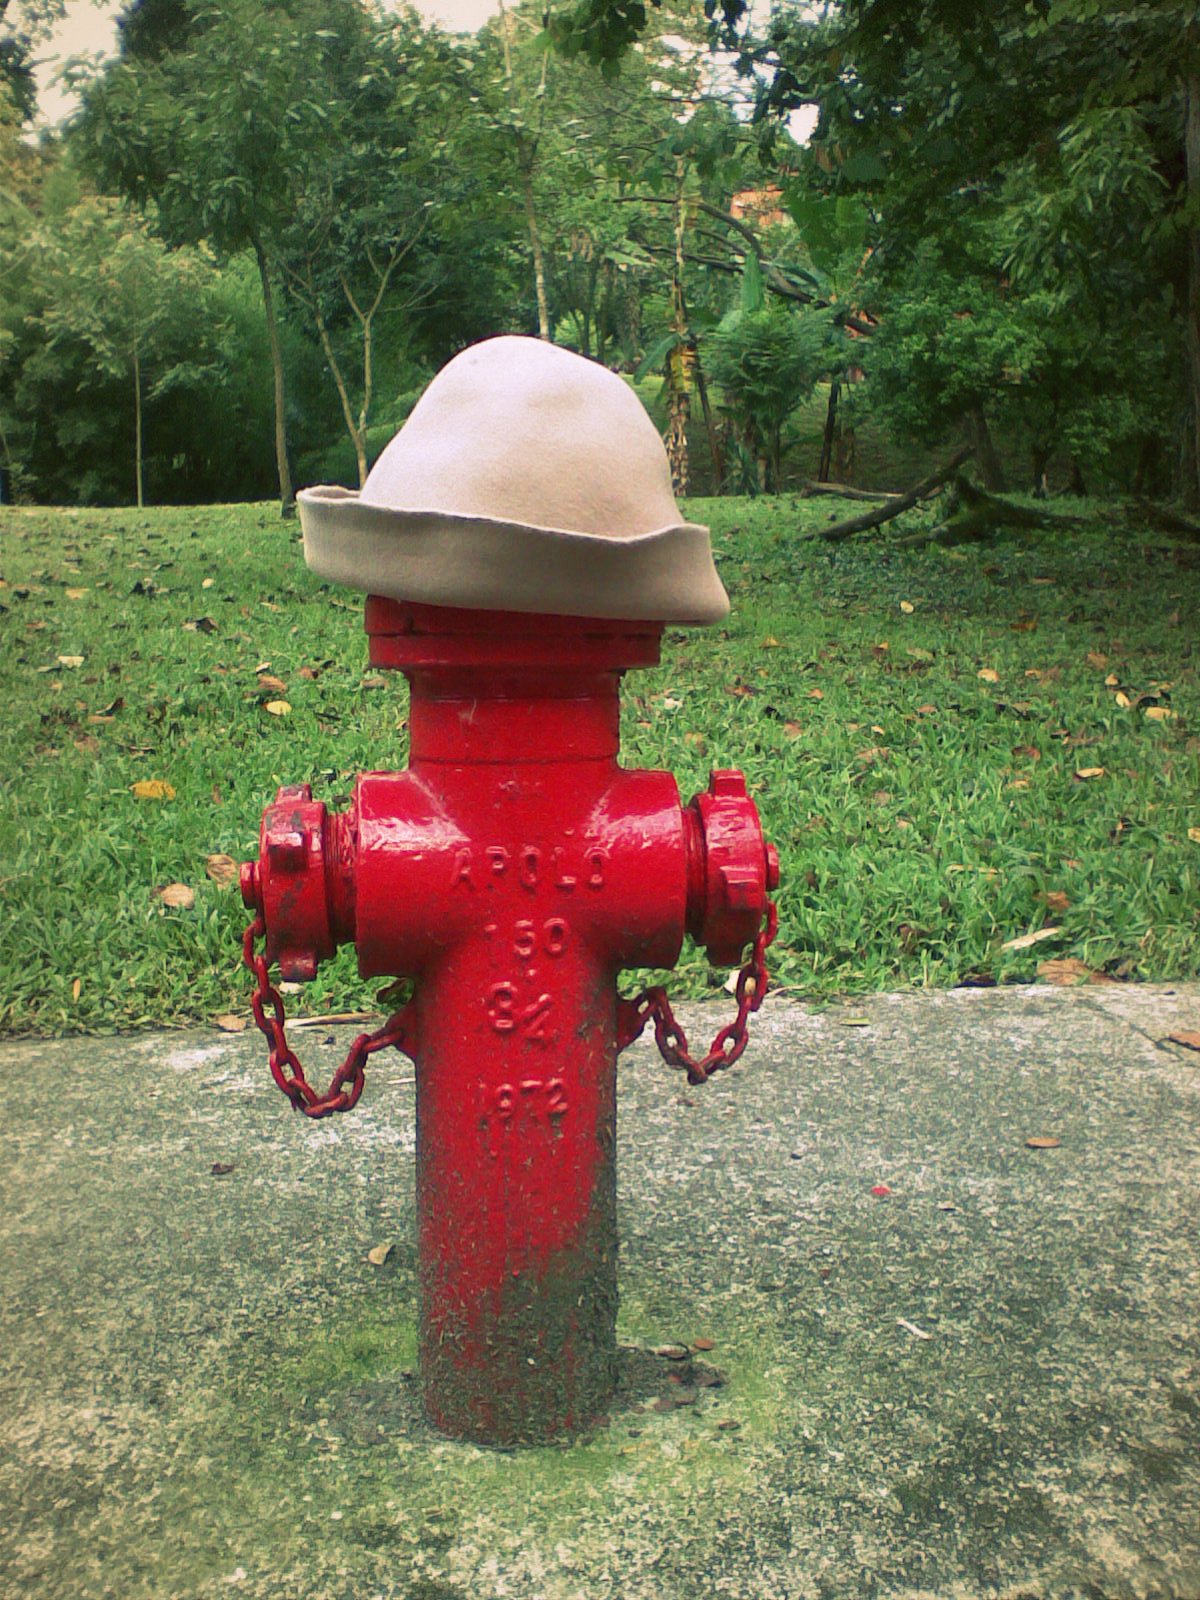 the red fire hydrant has a hat on it's top